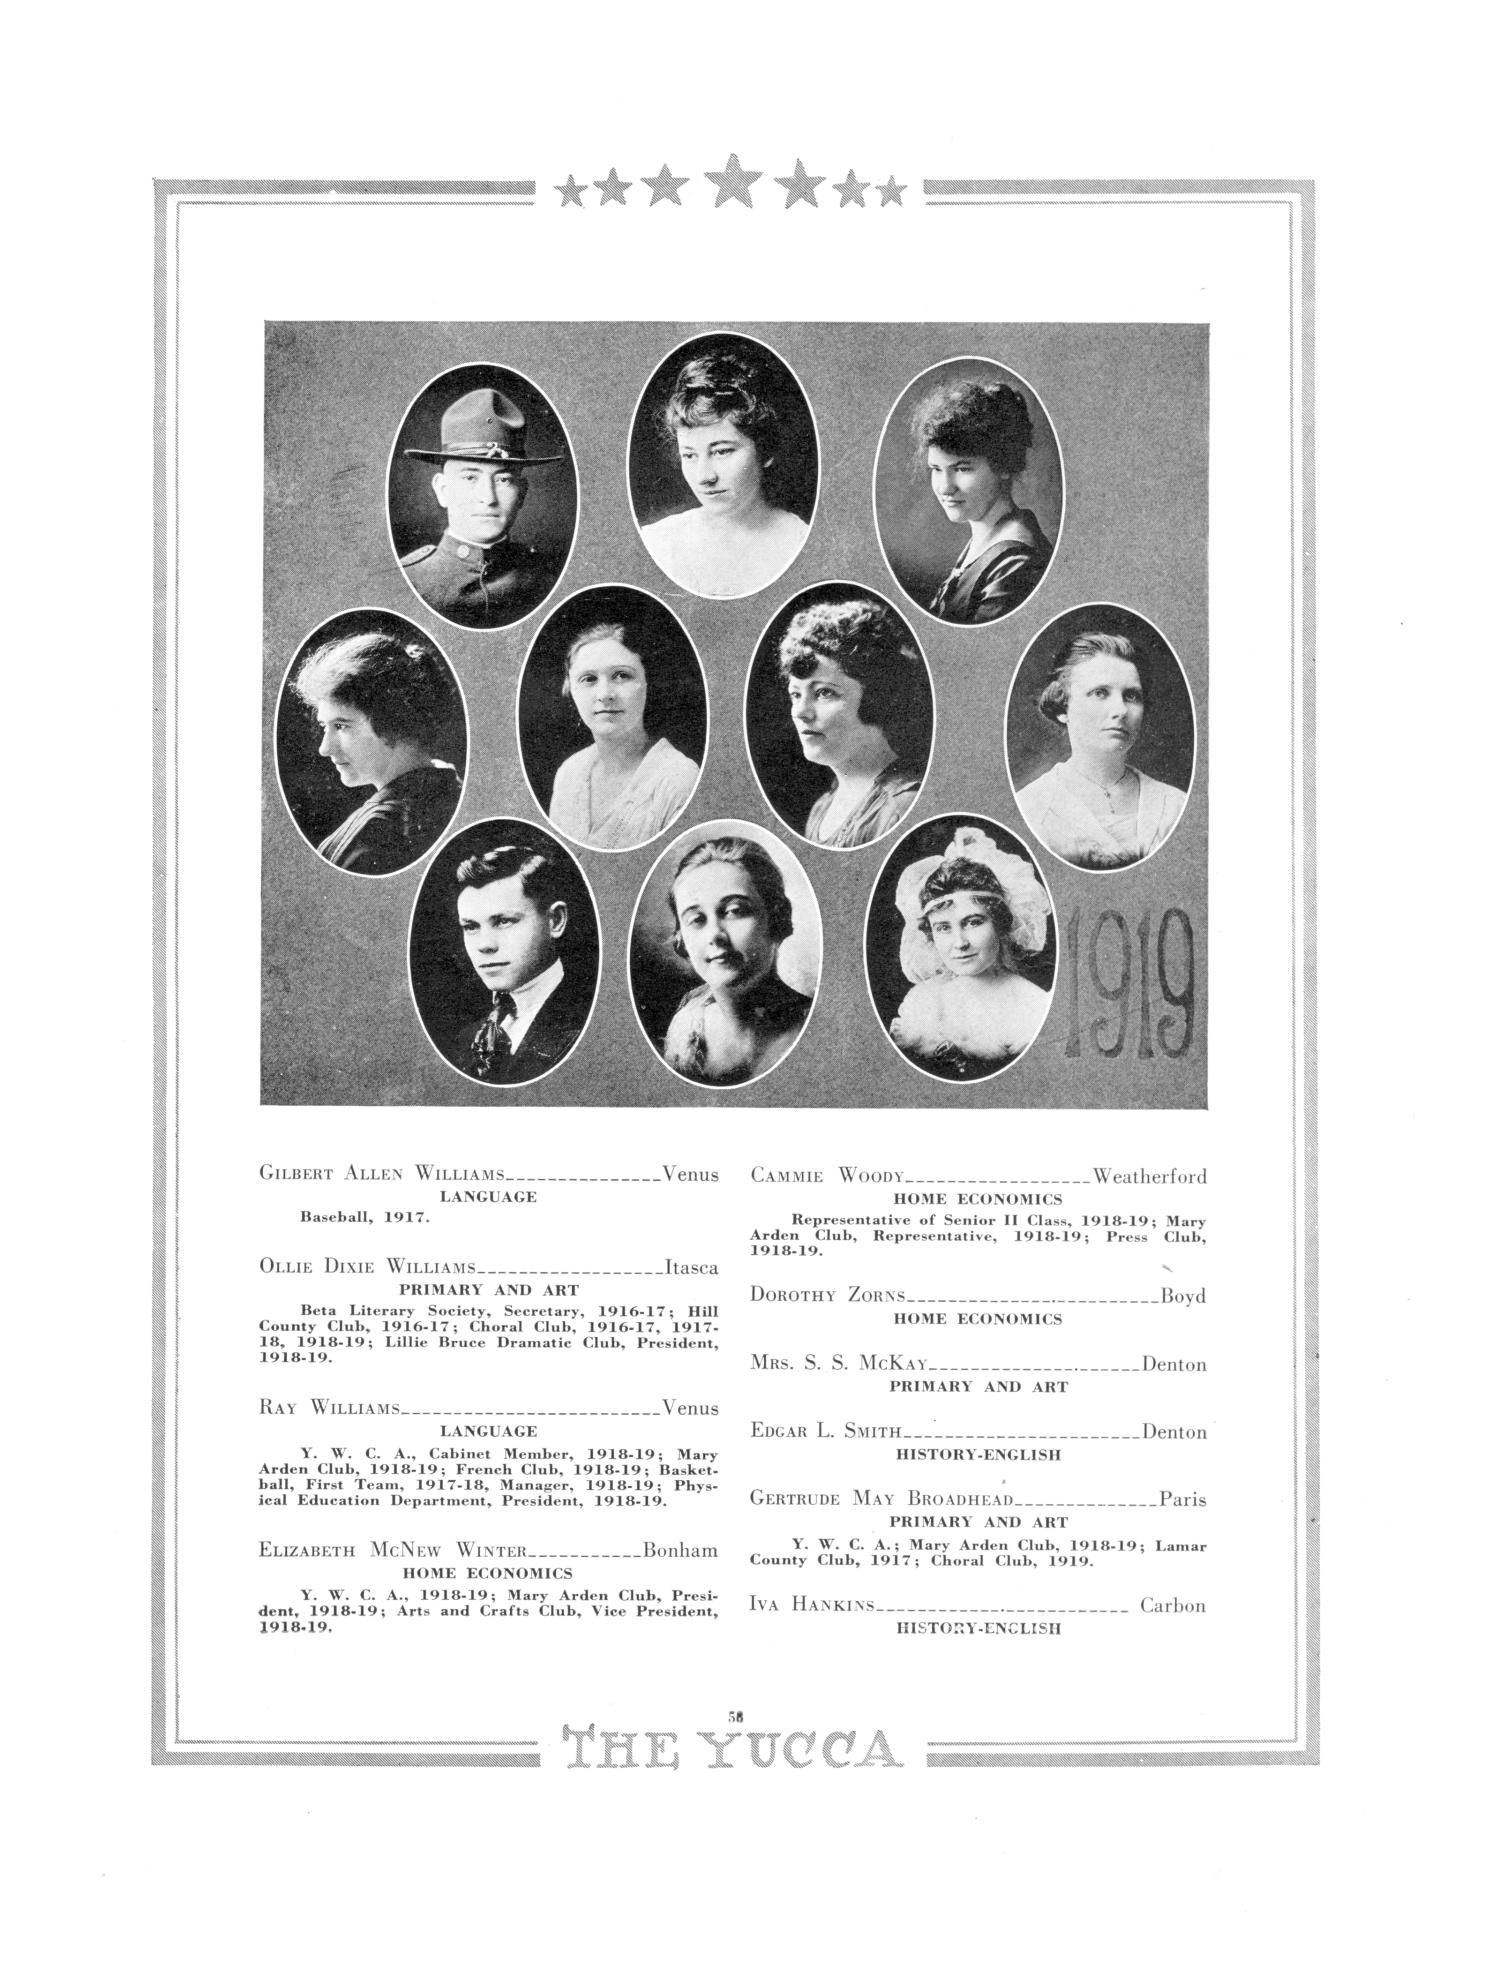 The Yucca, Yearbook of North Texas State Normal School, 1919
                                                
                                                    58
                                                